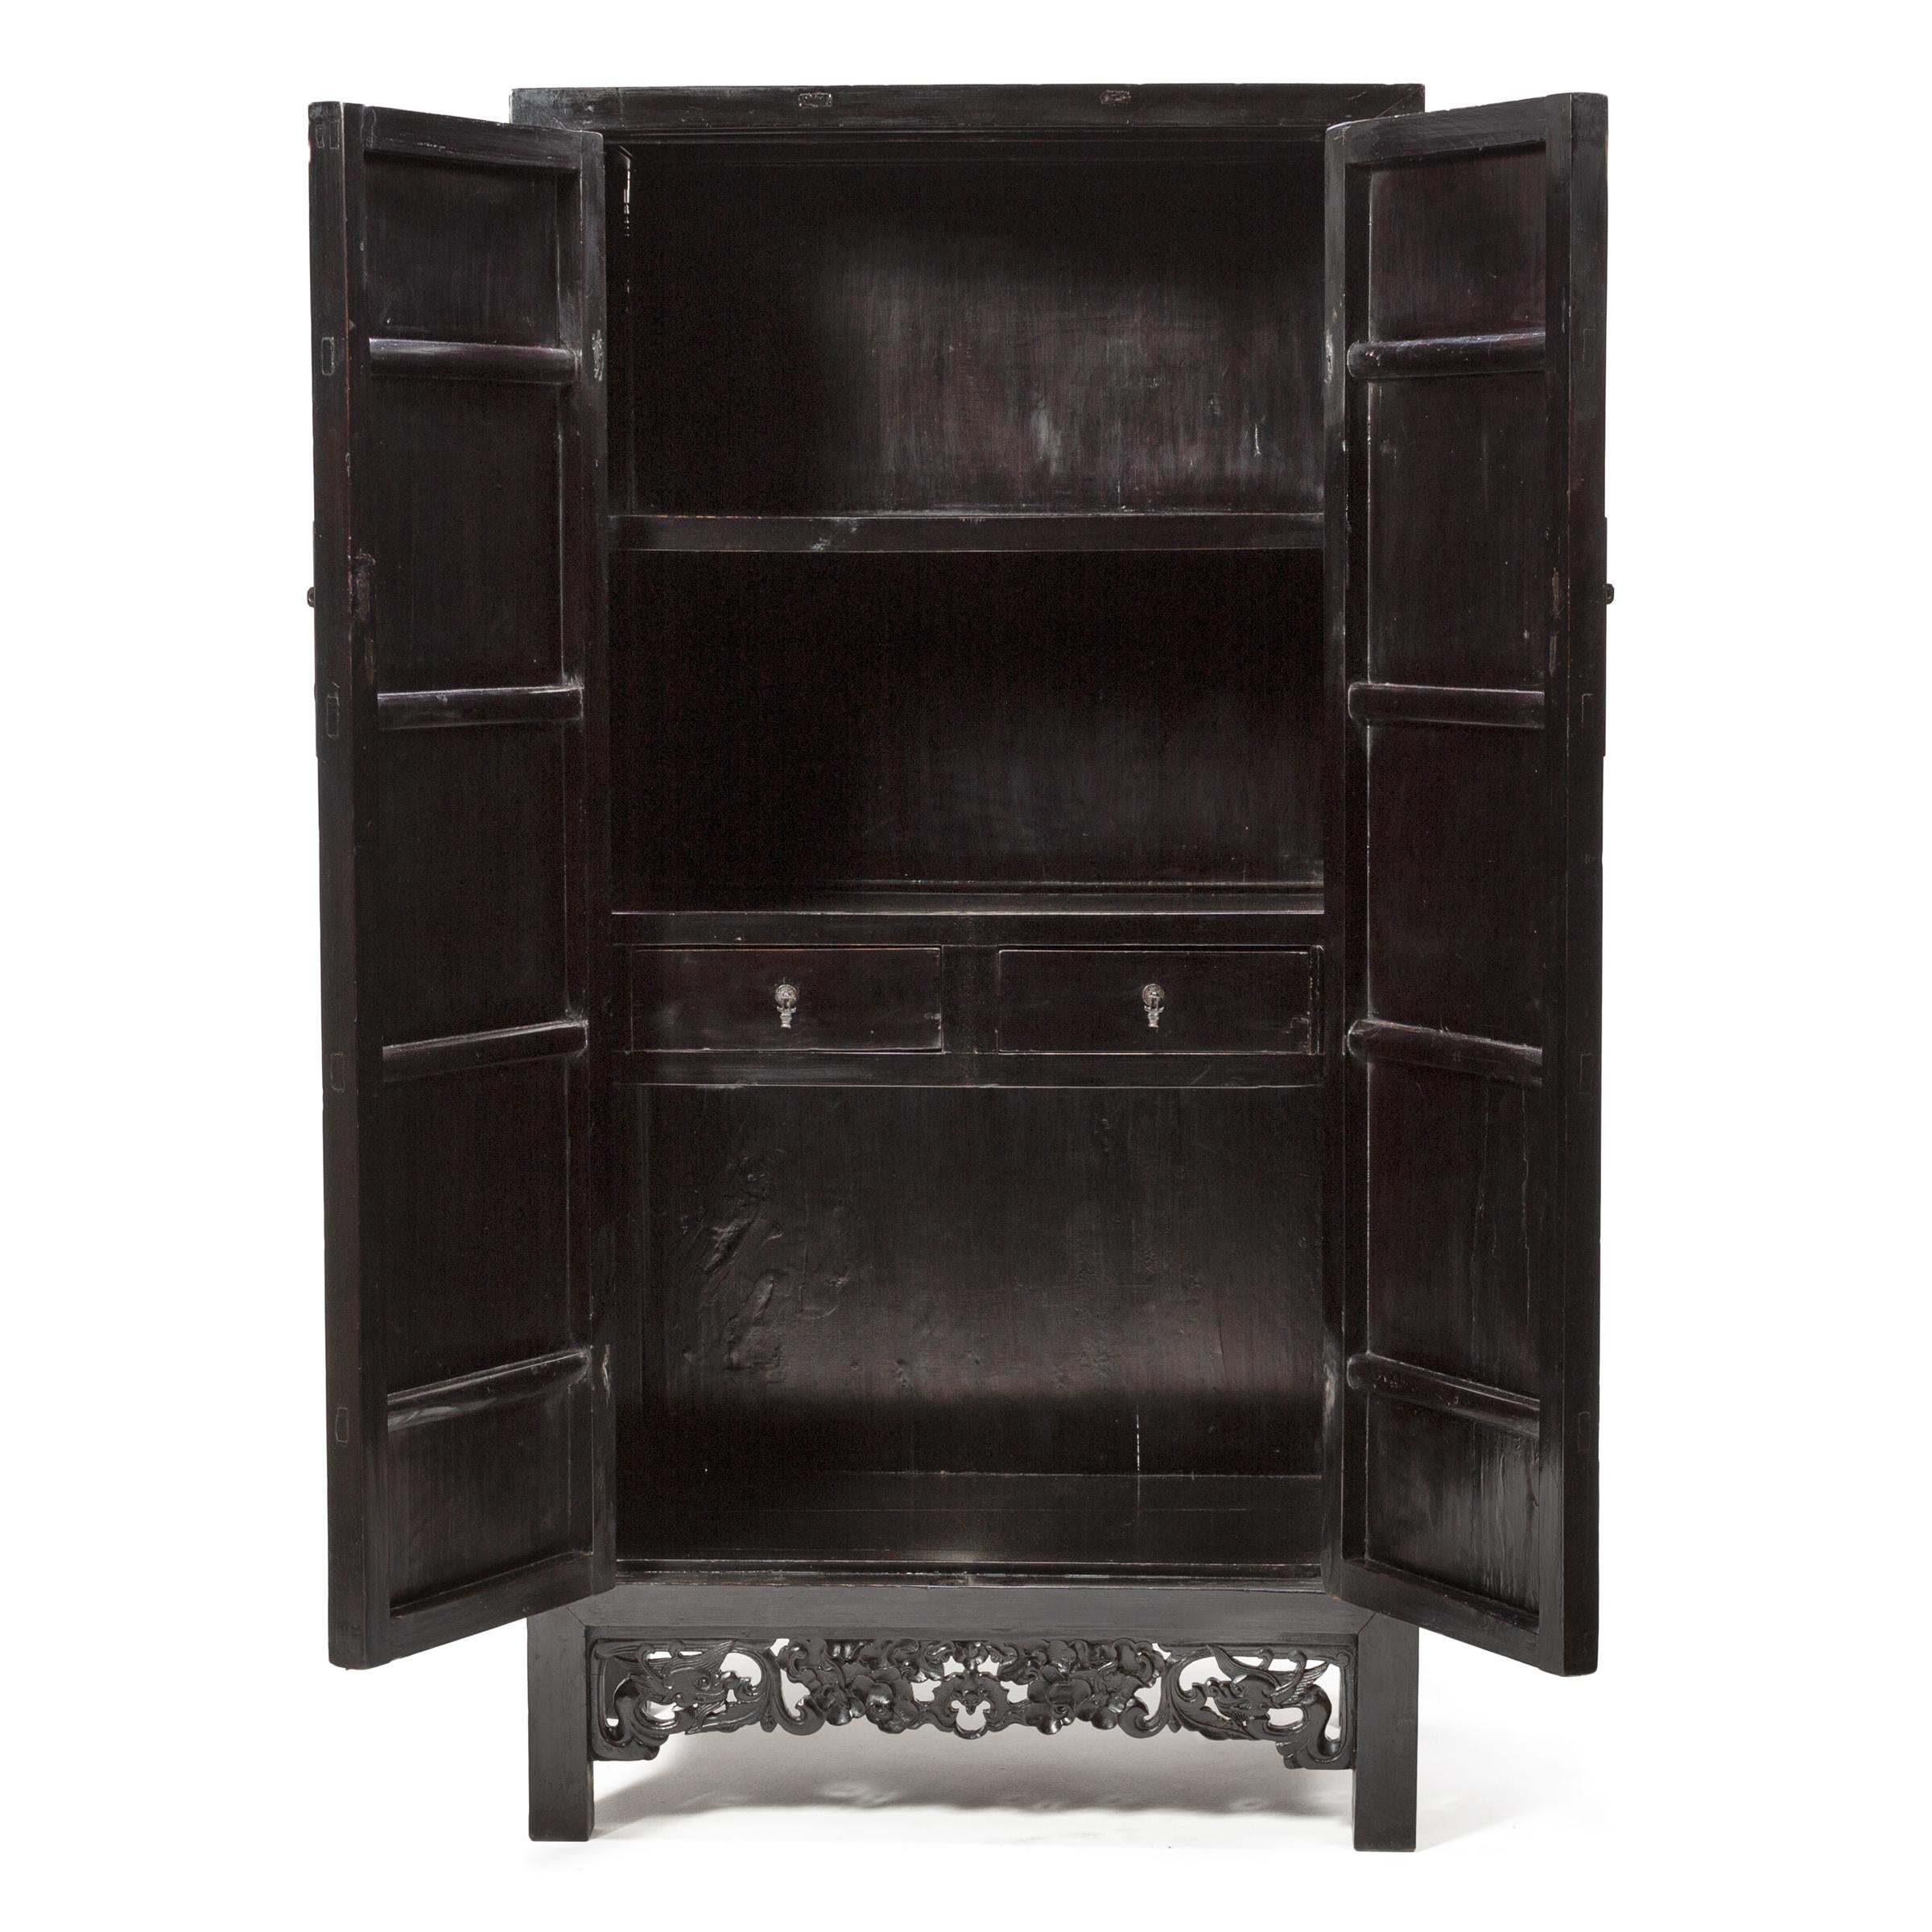 This fantastic mid-19th century cabinet hits all the right notes. Bringing the austere, Minimalist attitude of Ming dynasty design into the Qing dynasty, the artisan woodworkers who created the tall cabinet judiciously introduced intricate